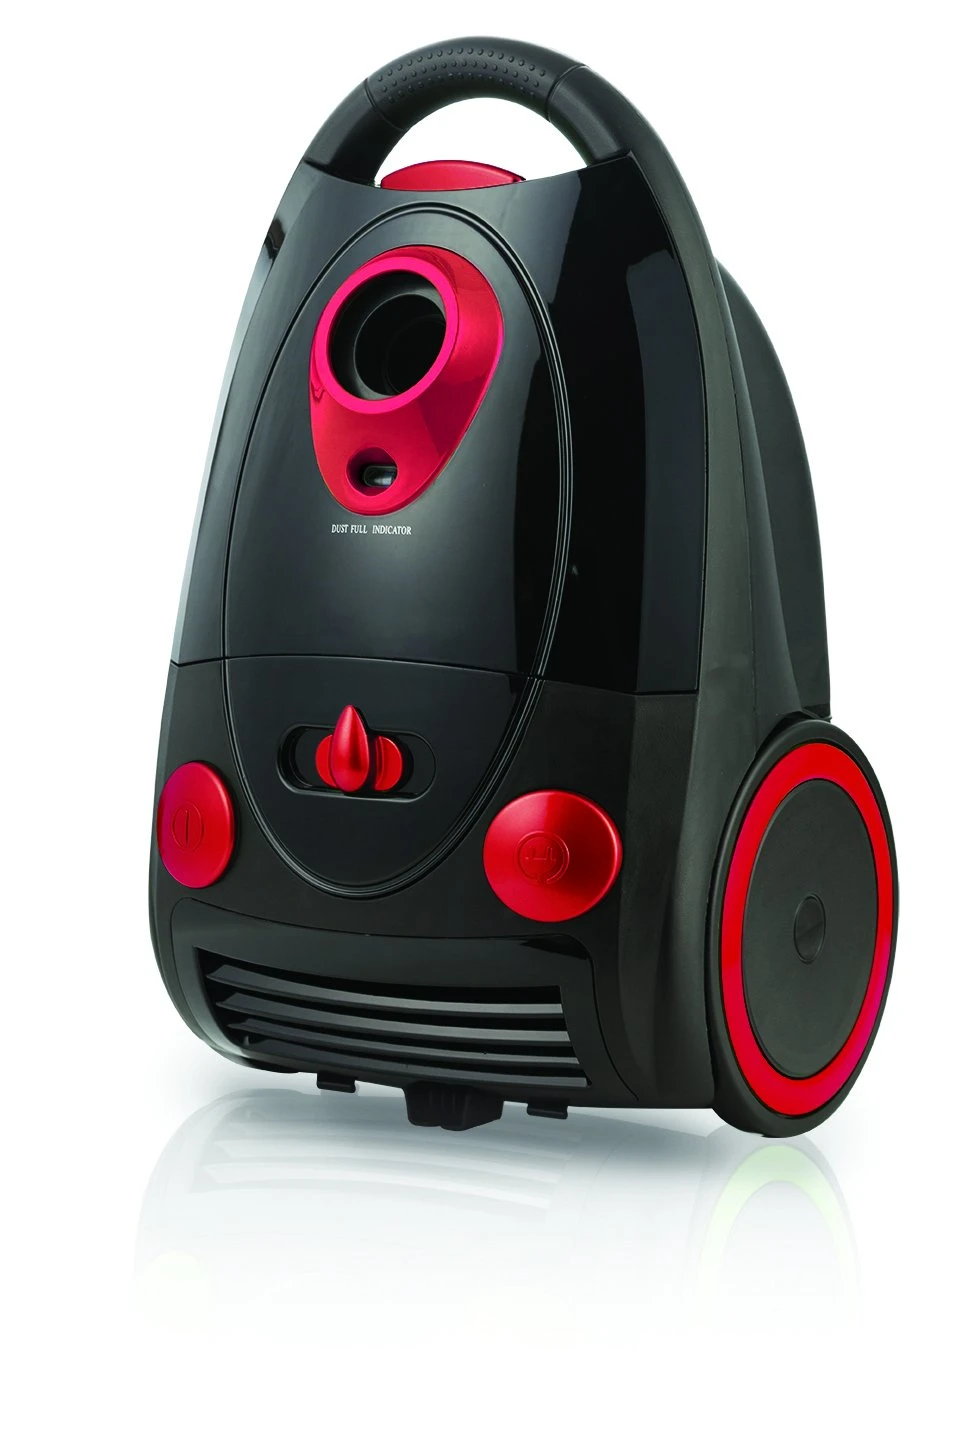 2000W High Suction Most Powerful Vacuum Cleaner